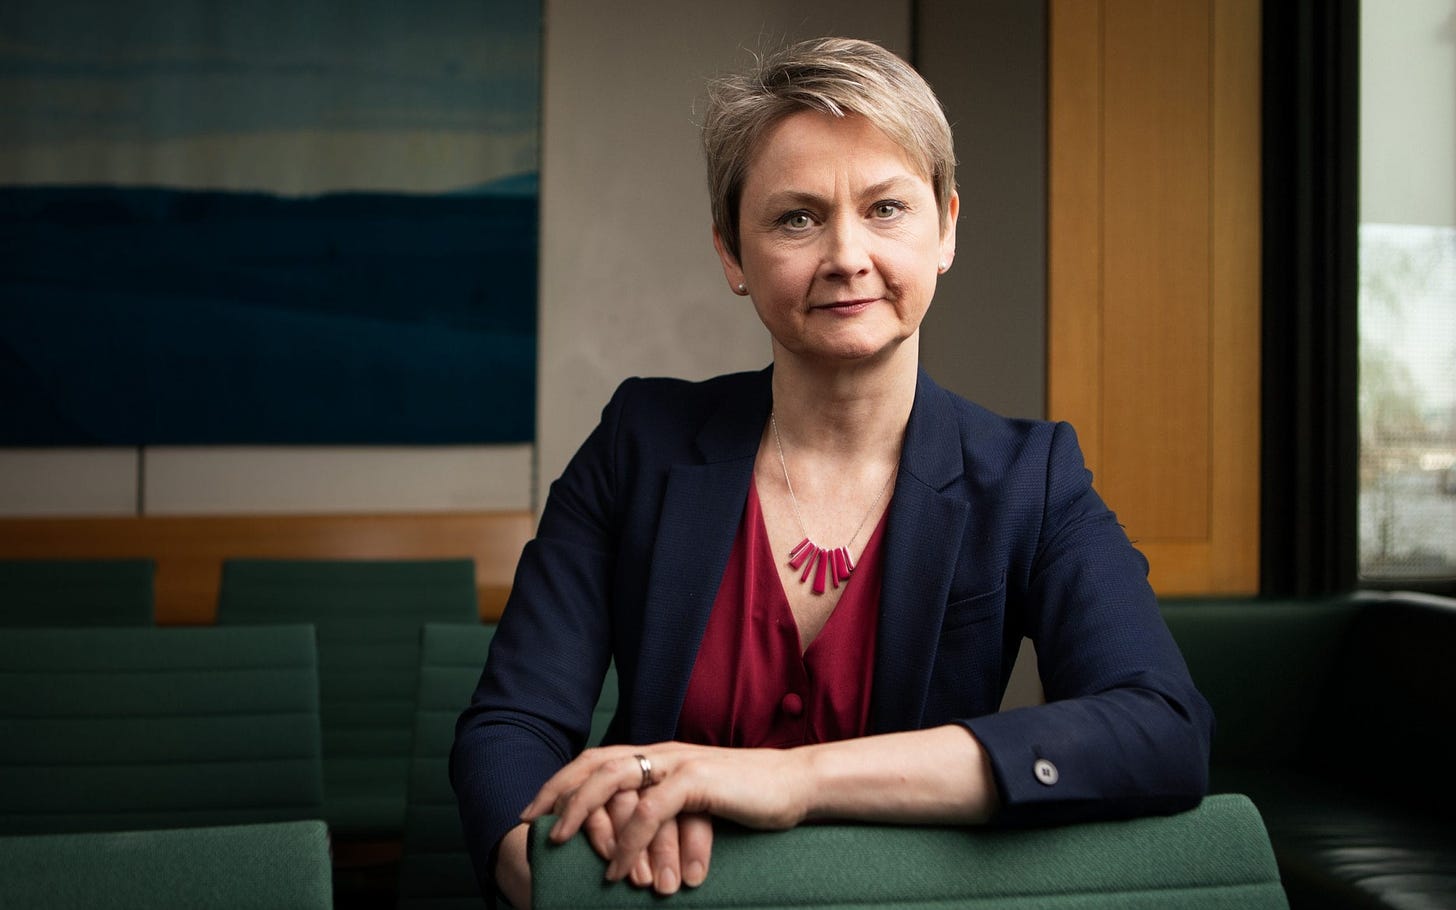 Yvette Cooper: 'The Home Office has walked away from crime and justice'